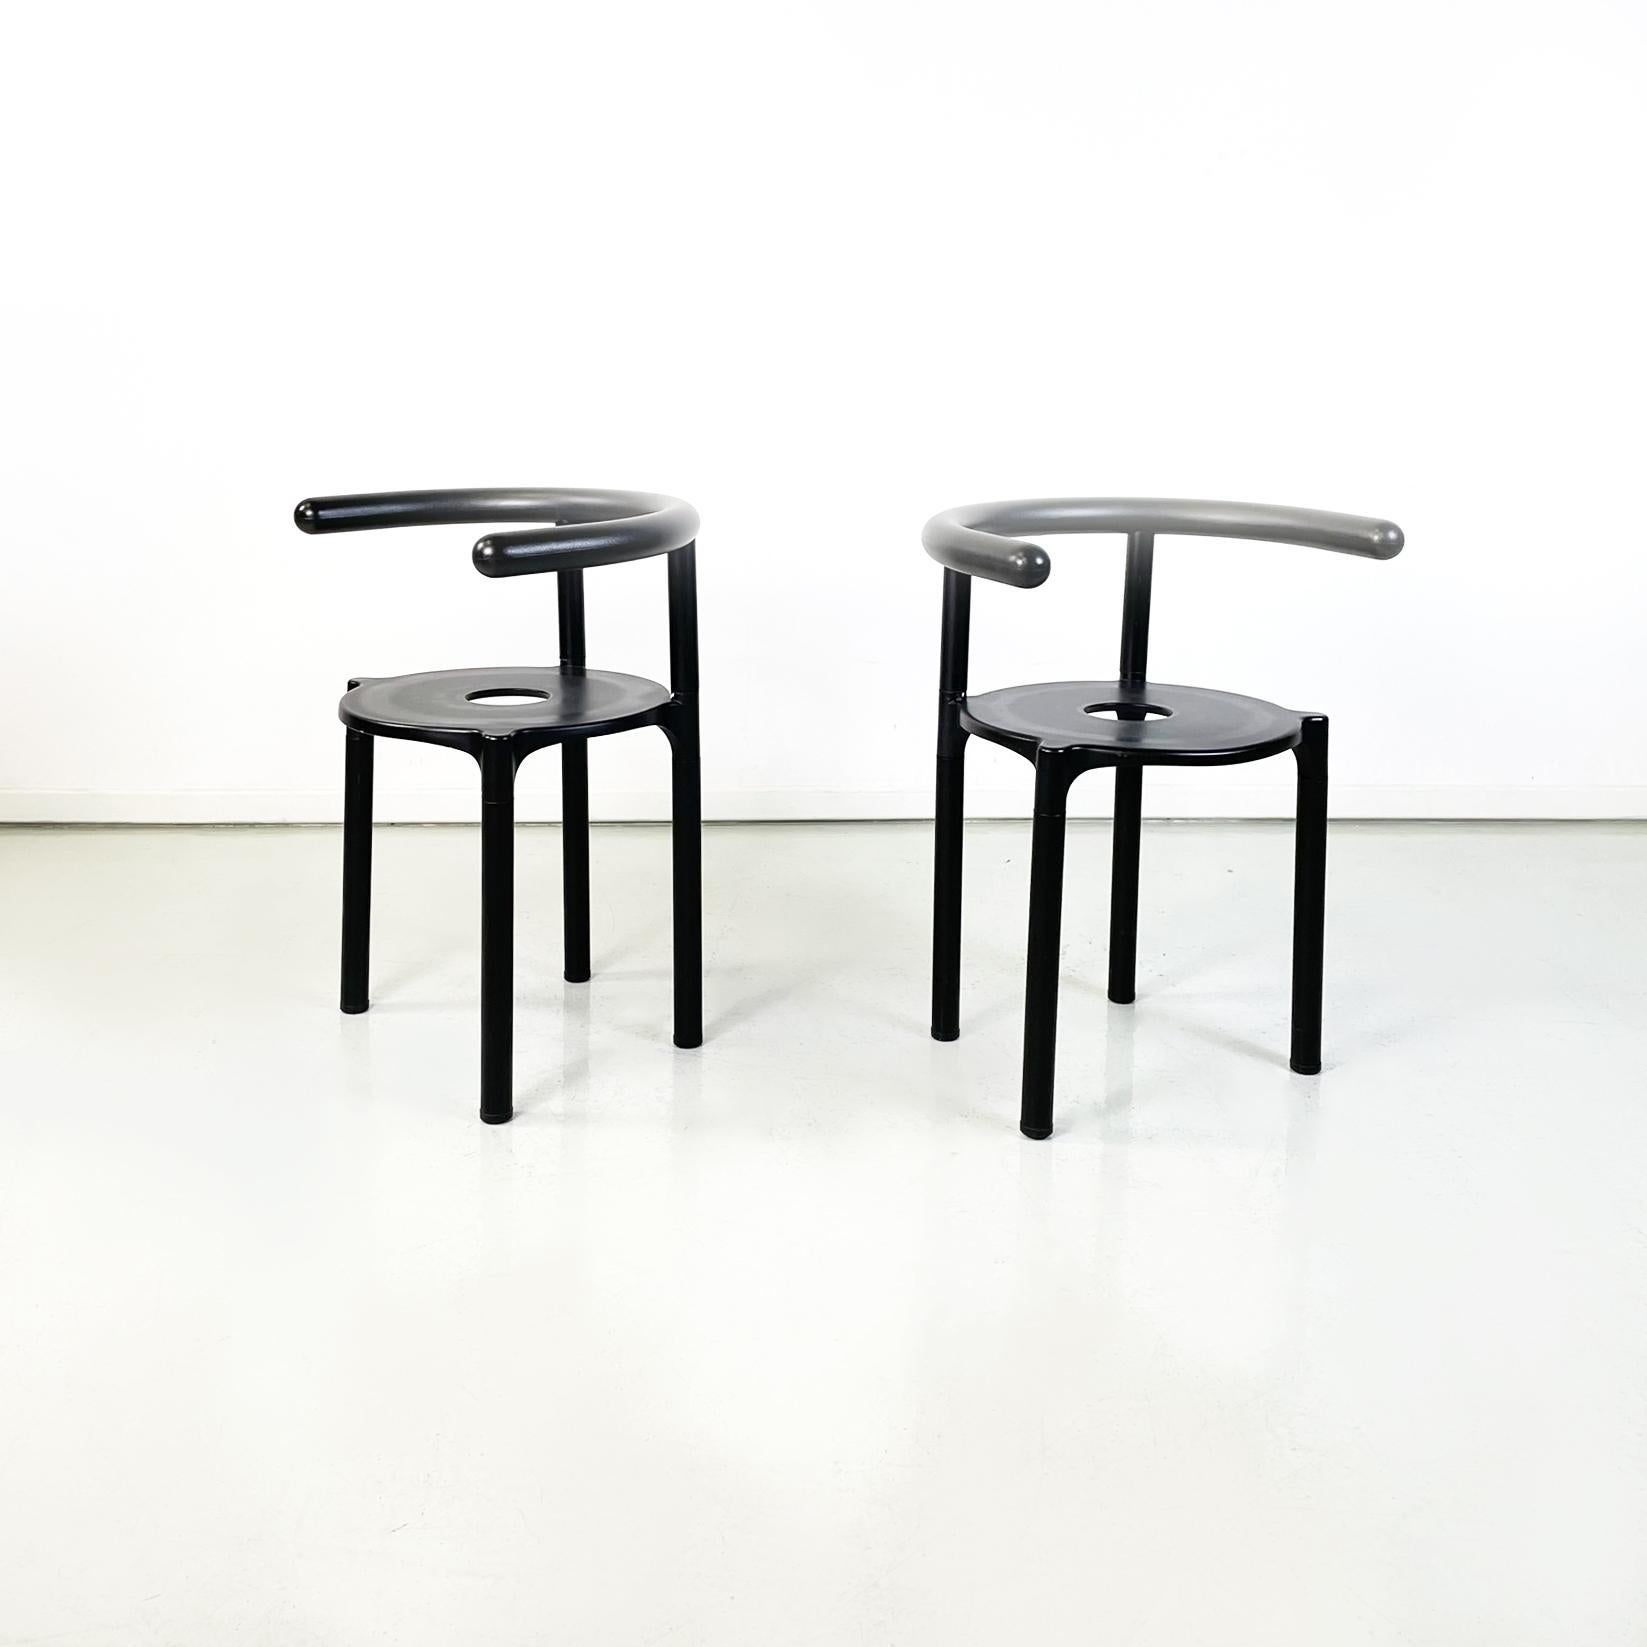 Italian modern Black metal plastic Chairs 4855 by Anna Castelli Kartell, 1990s
Pair of chairs mod. 4855 with round seat with a hole in the centre, in plastic and black metal. The cockpit-shaped structure has curved armrests with a round section.